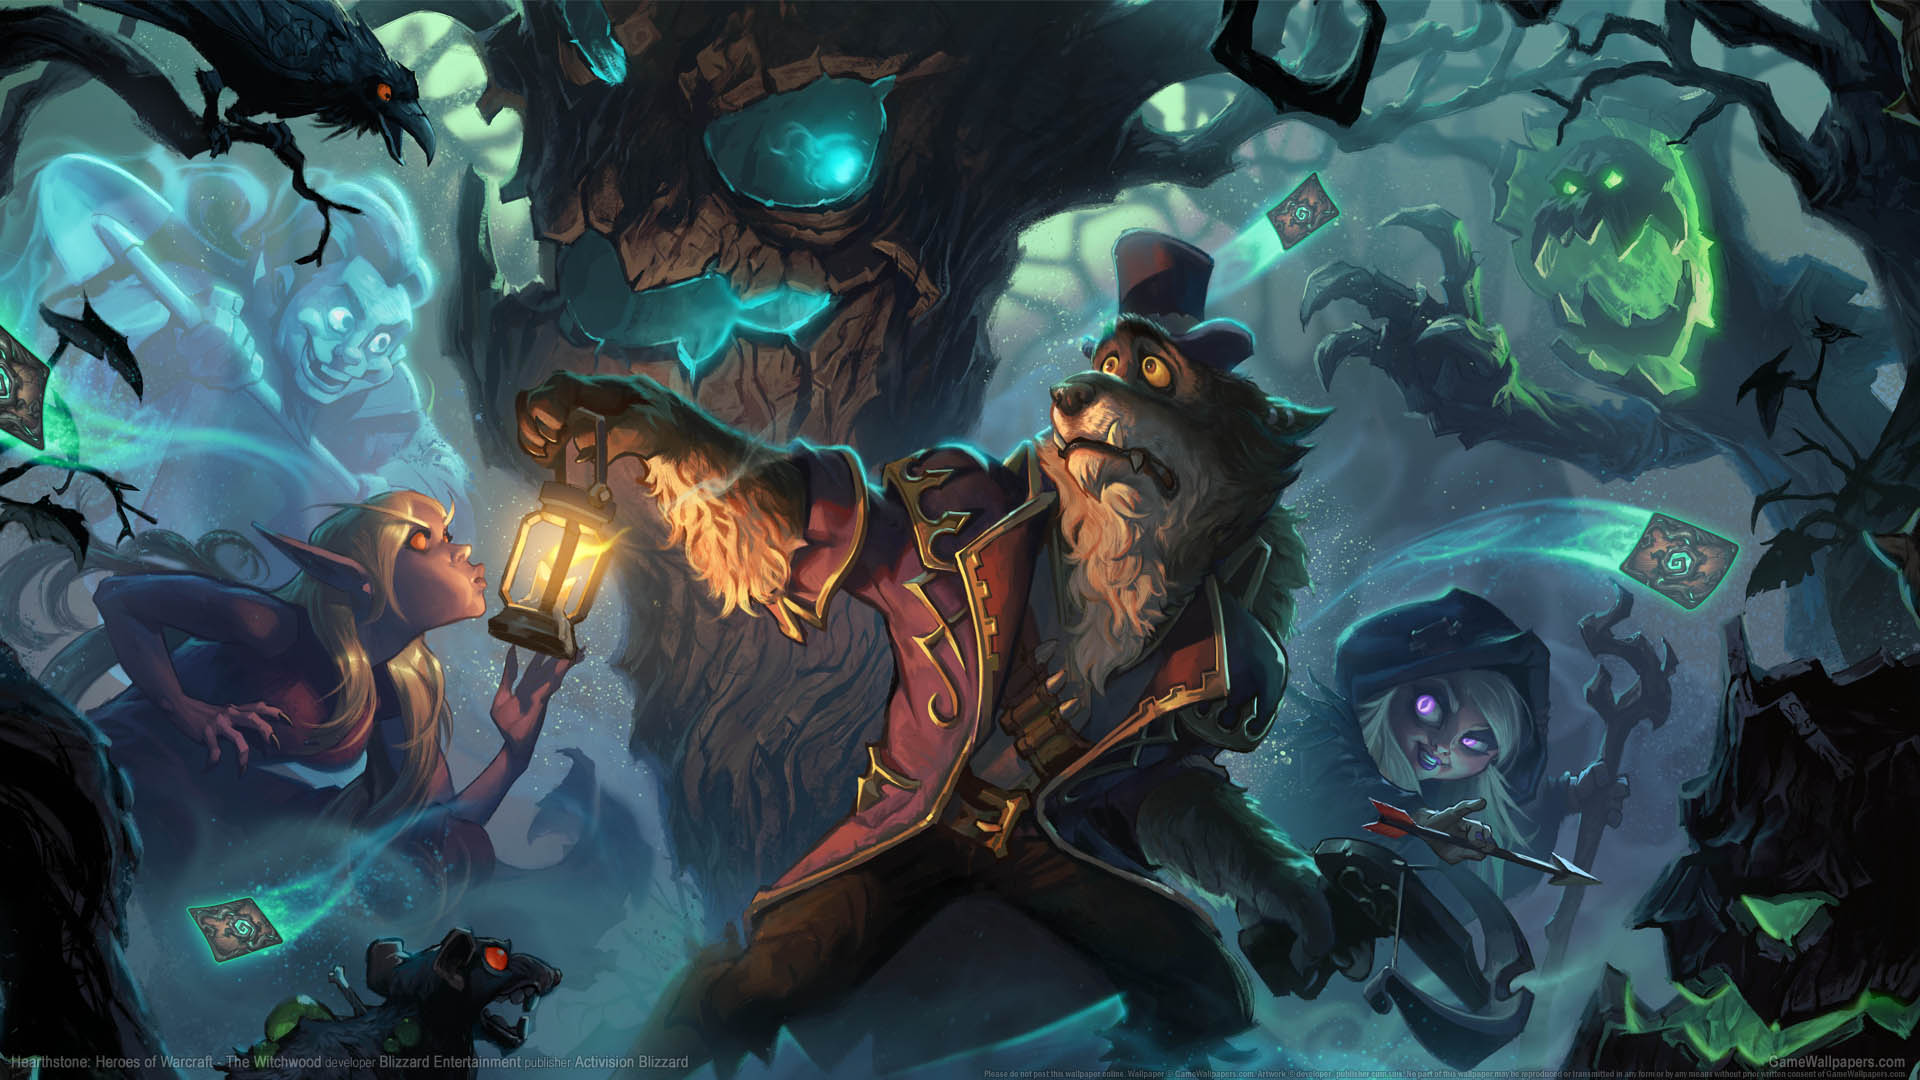 Hearthstone: Heroes of Warcraft - The Witchwood wallpaper 01 1920x1080